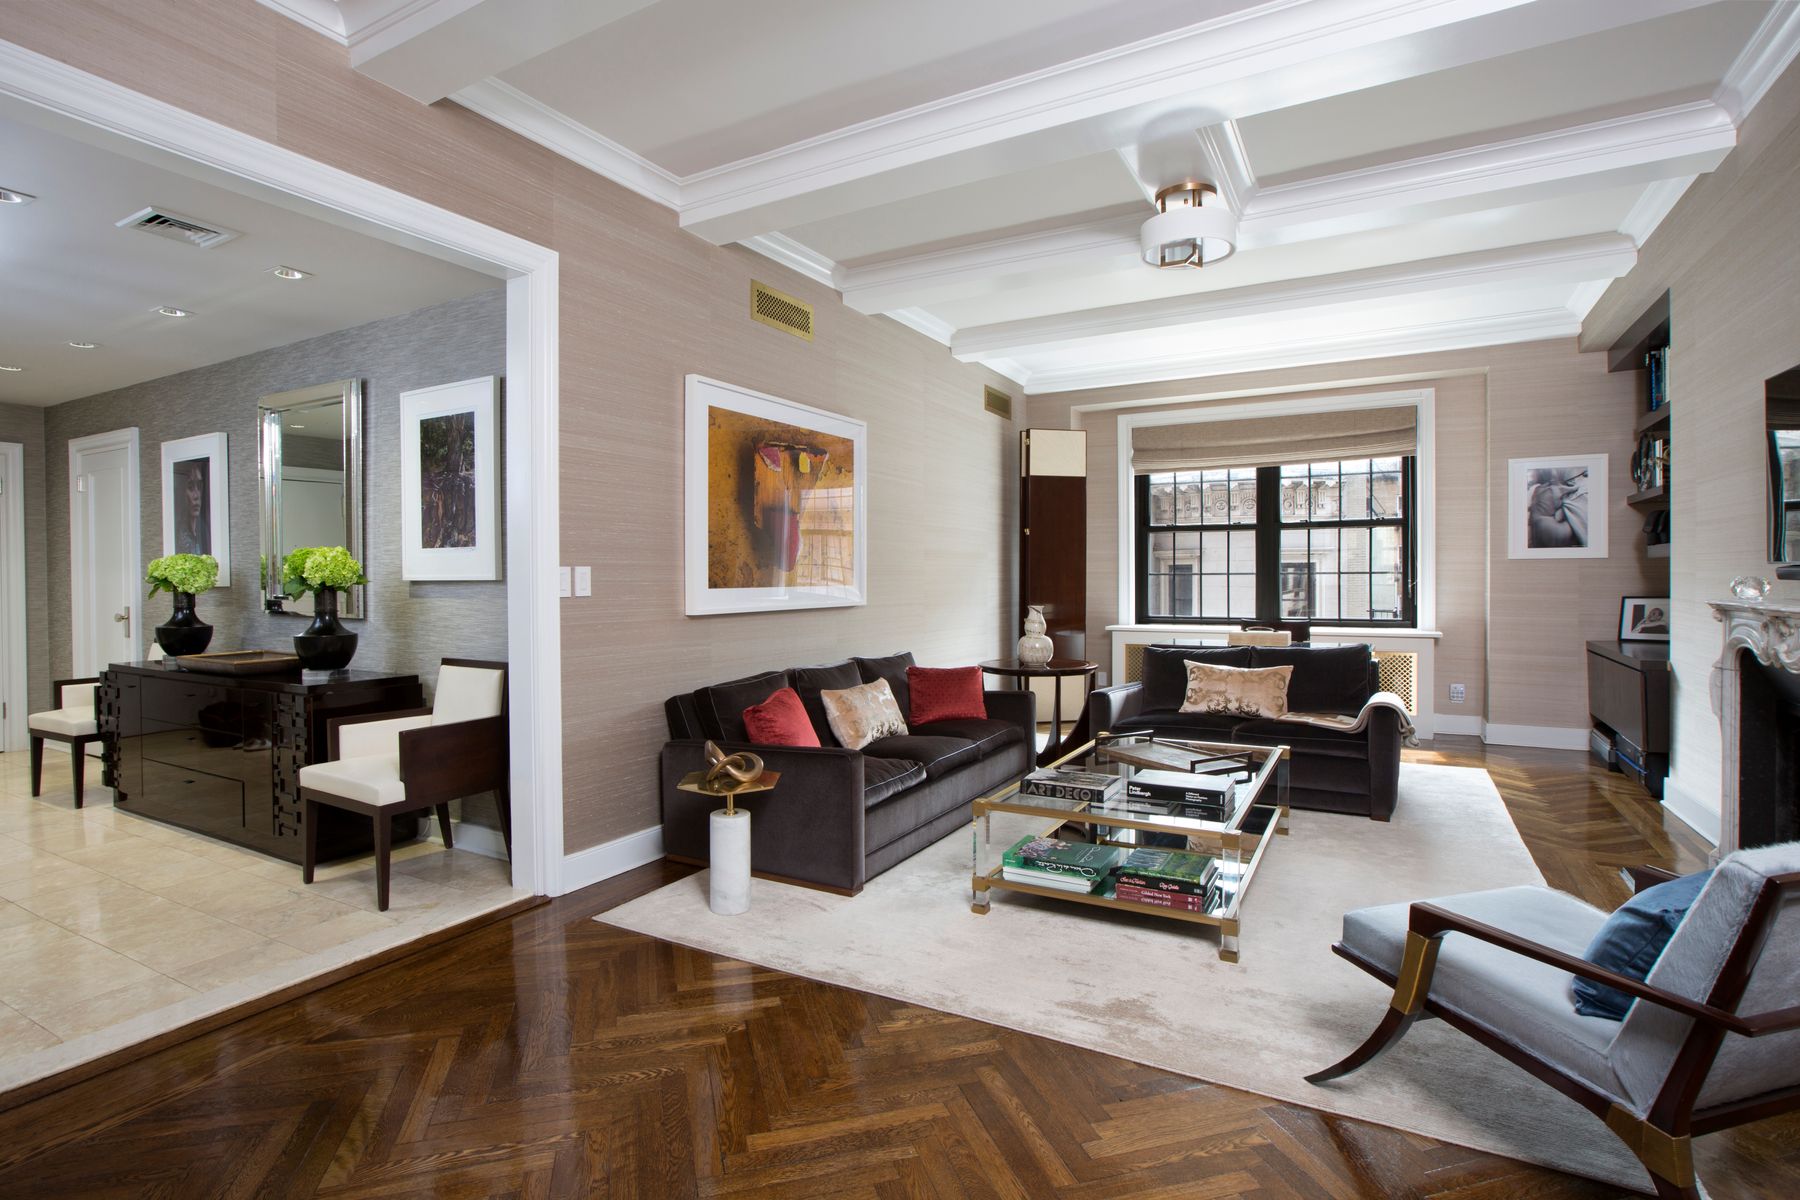 Martine Capdevielle_Luxury Real Estate NYC_21 East 66th St Apt 5w 1.jpg